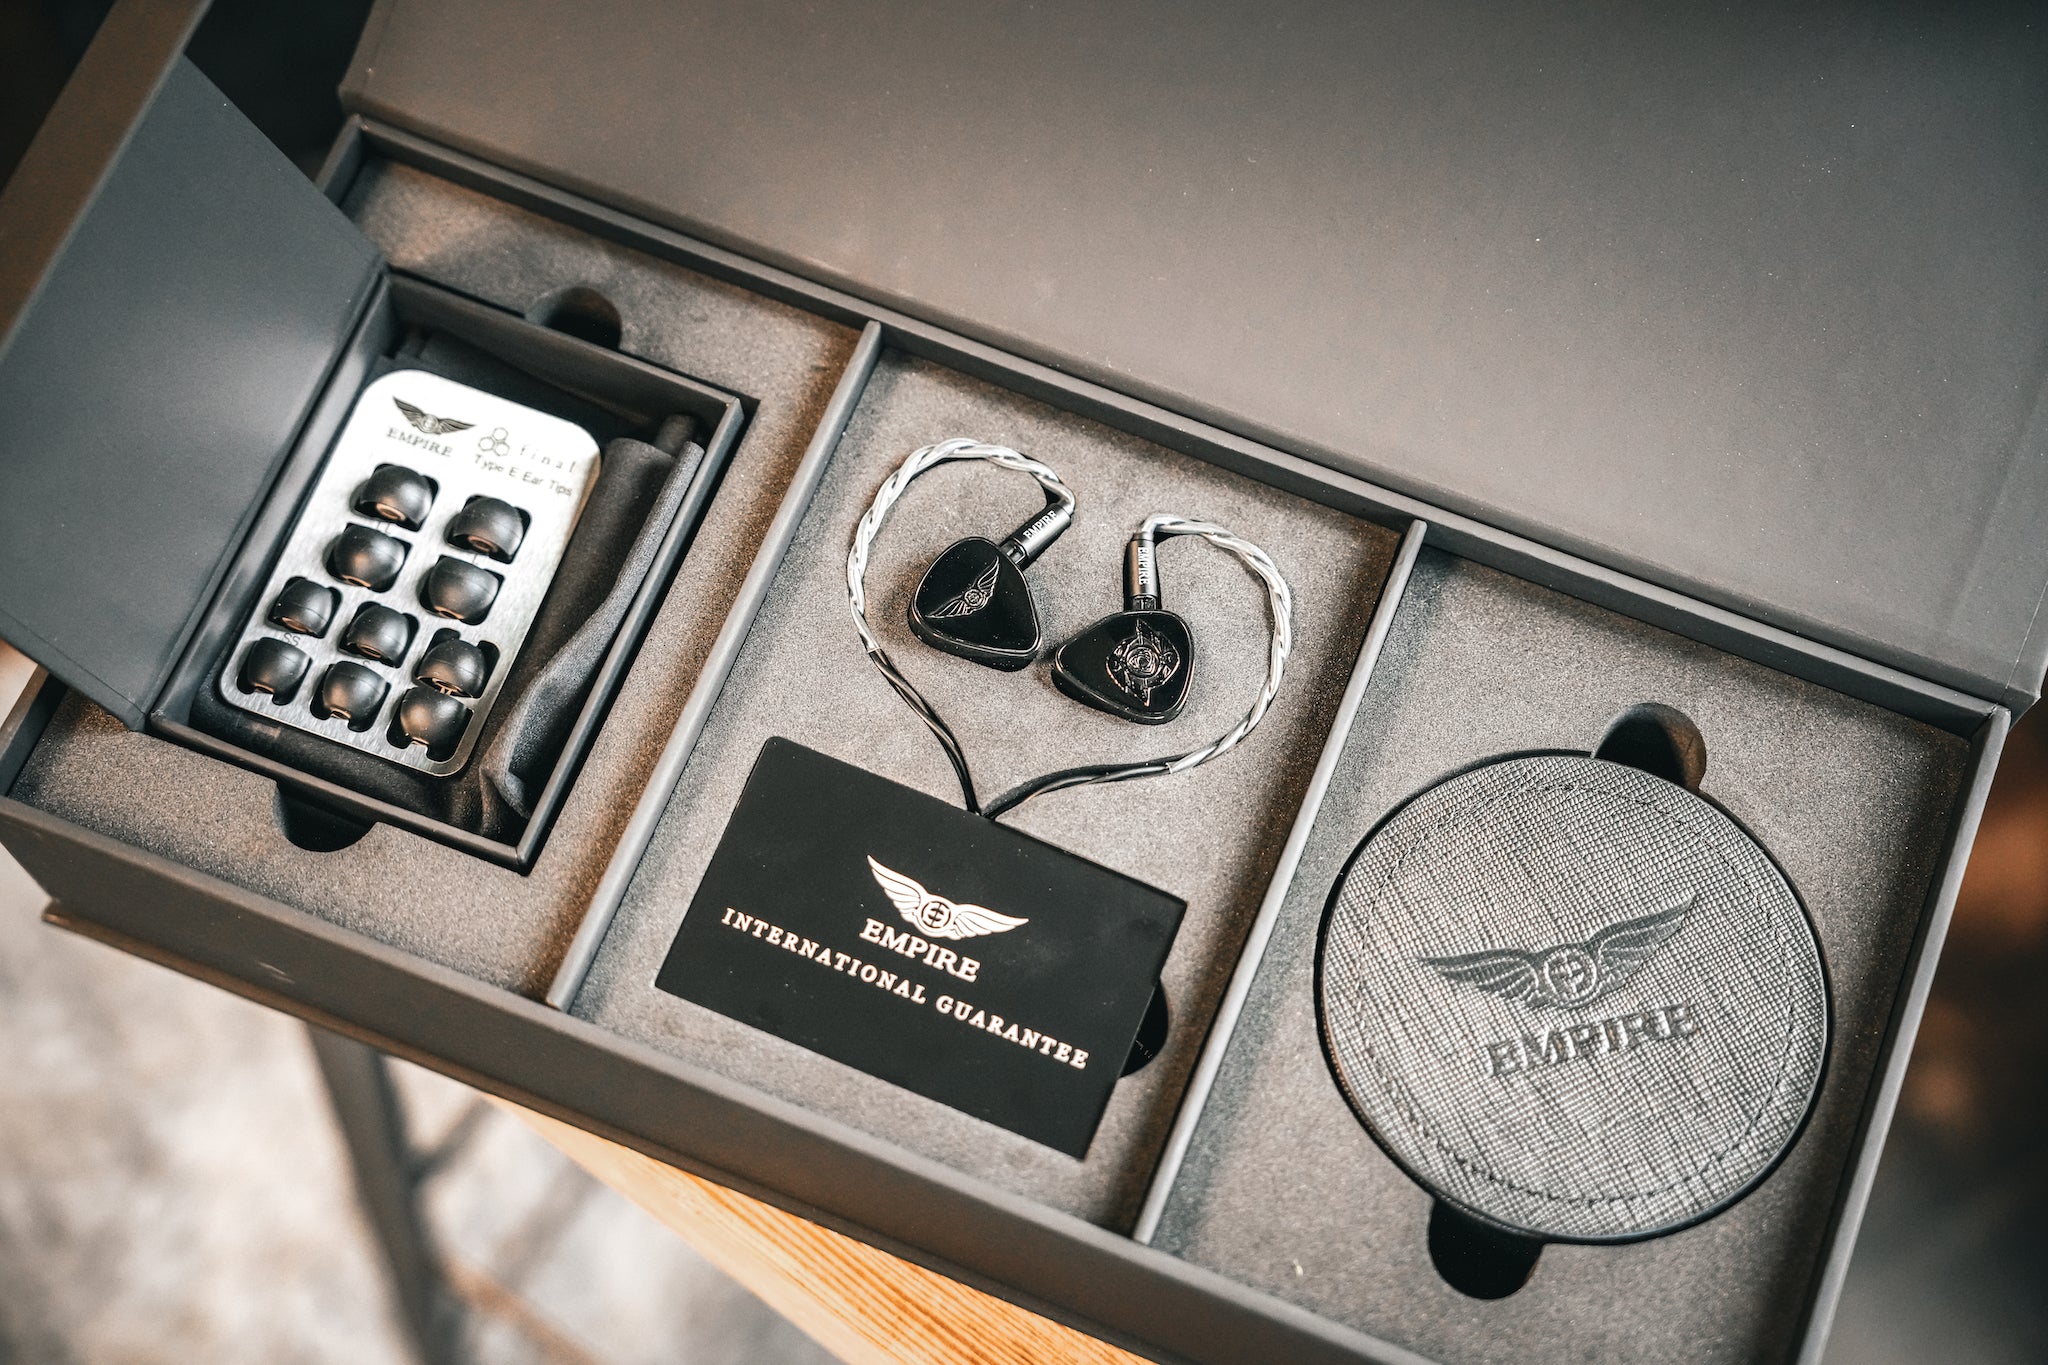 Empire Ears Raven black earphones inserted into open retail package with all accessories from Bloom Audio gallery